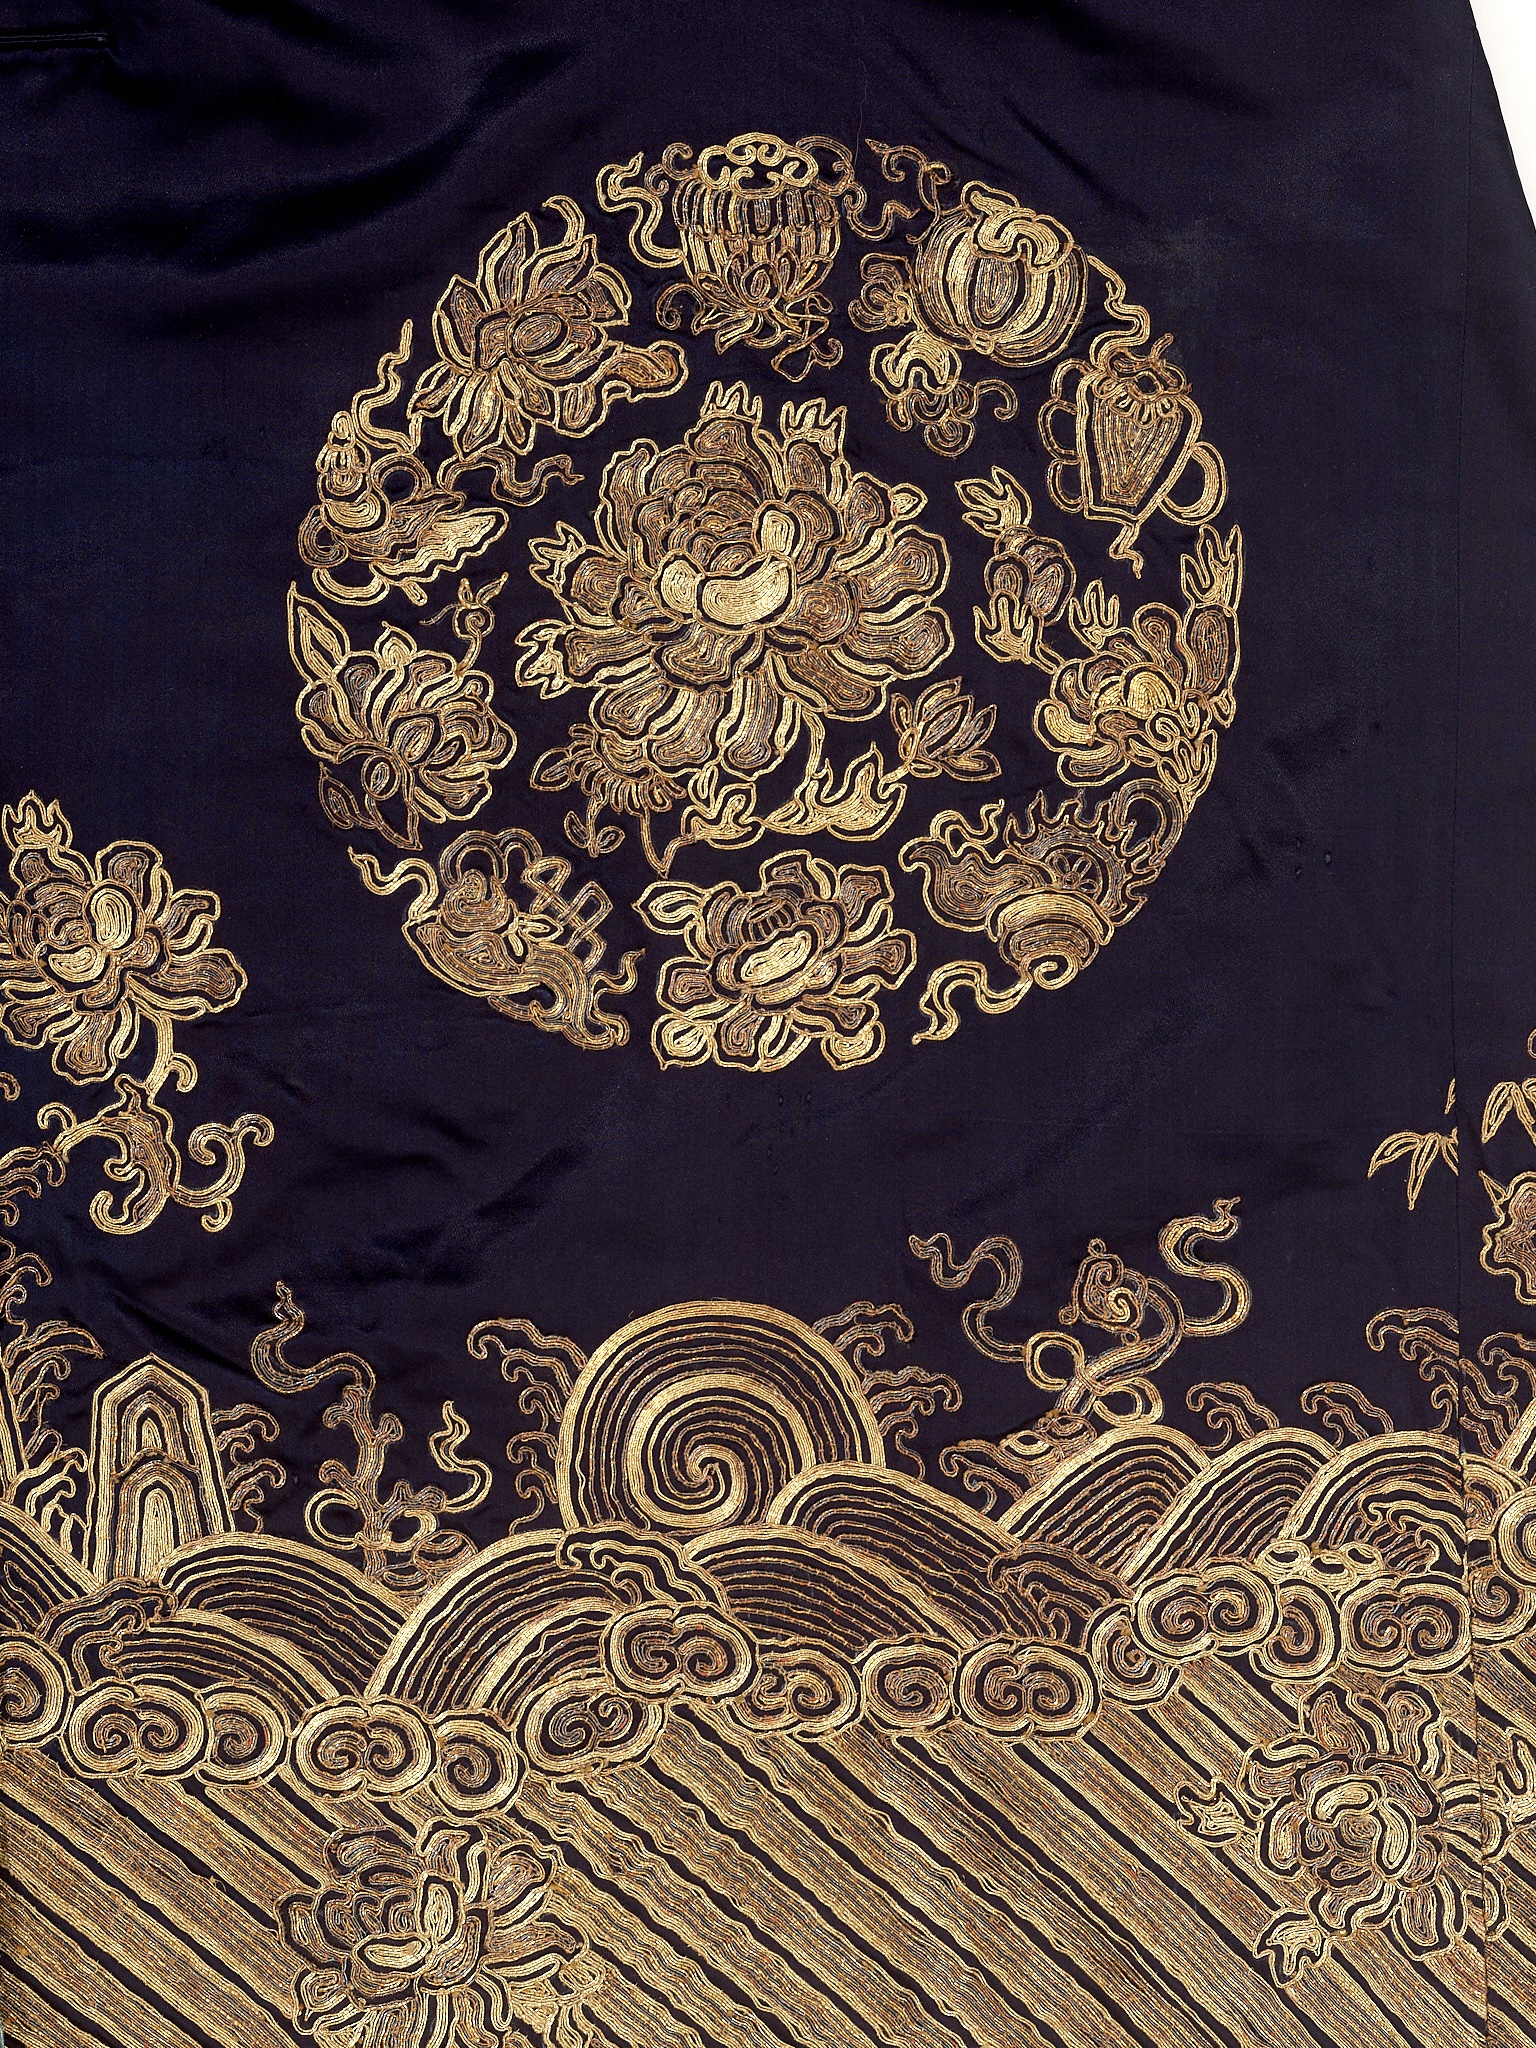 A WOMAN'S SILVER AND GOLD-EMBROIDERED SILK ROUNDEL ROBE, 19TH CENTURY - Image 9 of 14